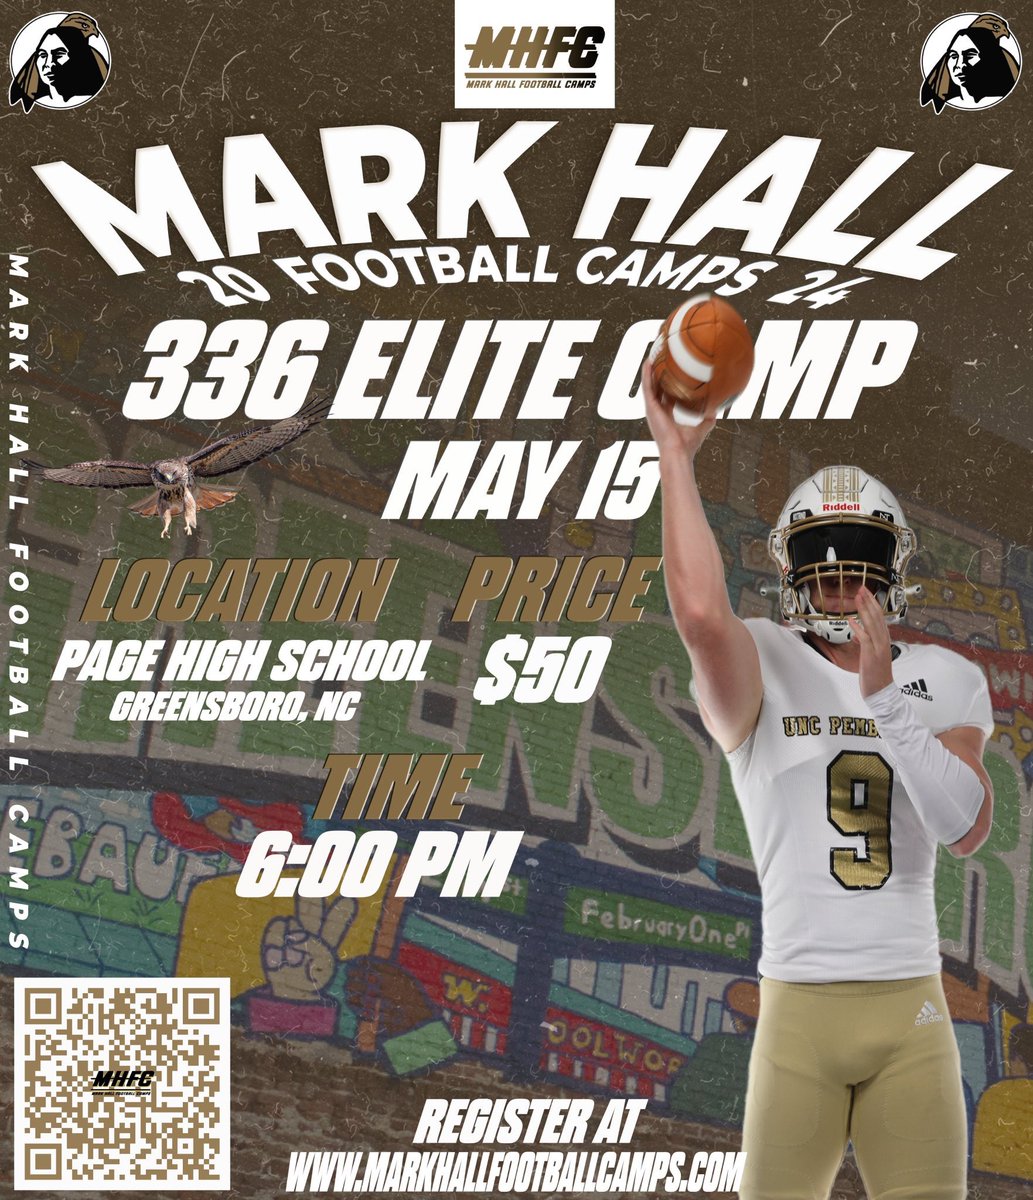 NORTH CAROLINA COME ON AND RASIE UP‼️CANT WAIT TO SEE THE TALENT NORTH CAROLINA HAS TO OFFER! #STANDARDISLEGENDARY #WELCOMETOTHEDARKSIDE🏴‍☠️ #BRAVESNATION ⬇️⬇️ markhallfootballcamps.com